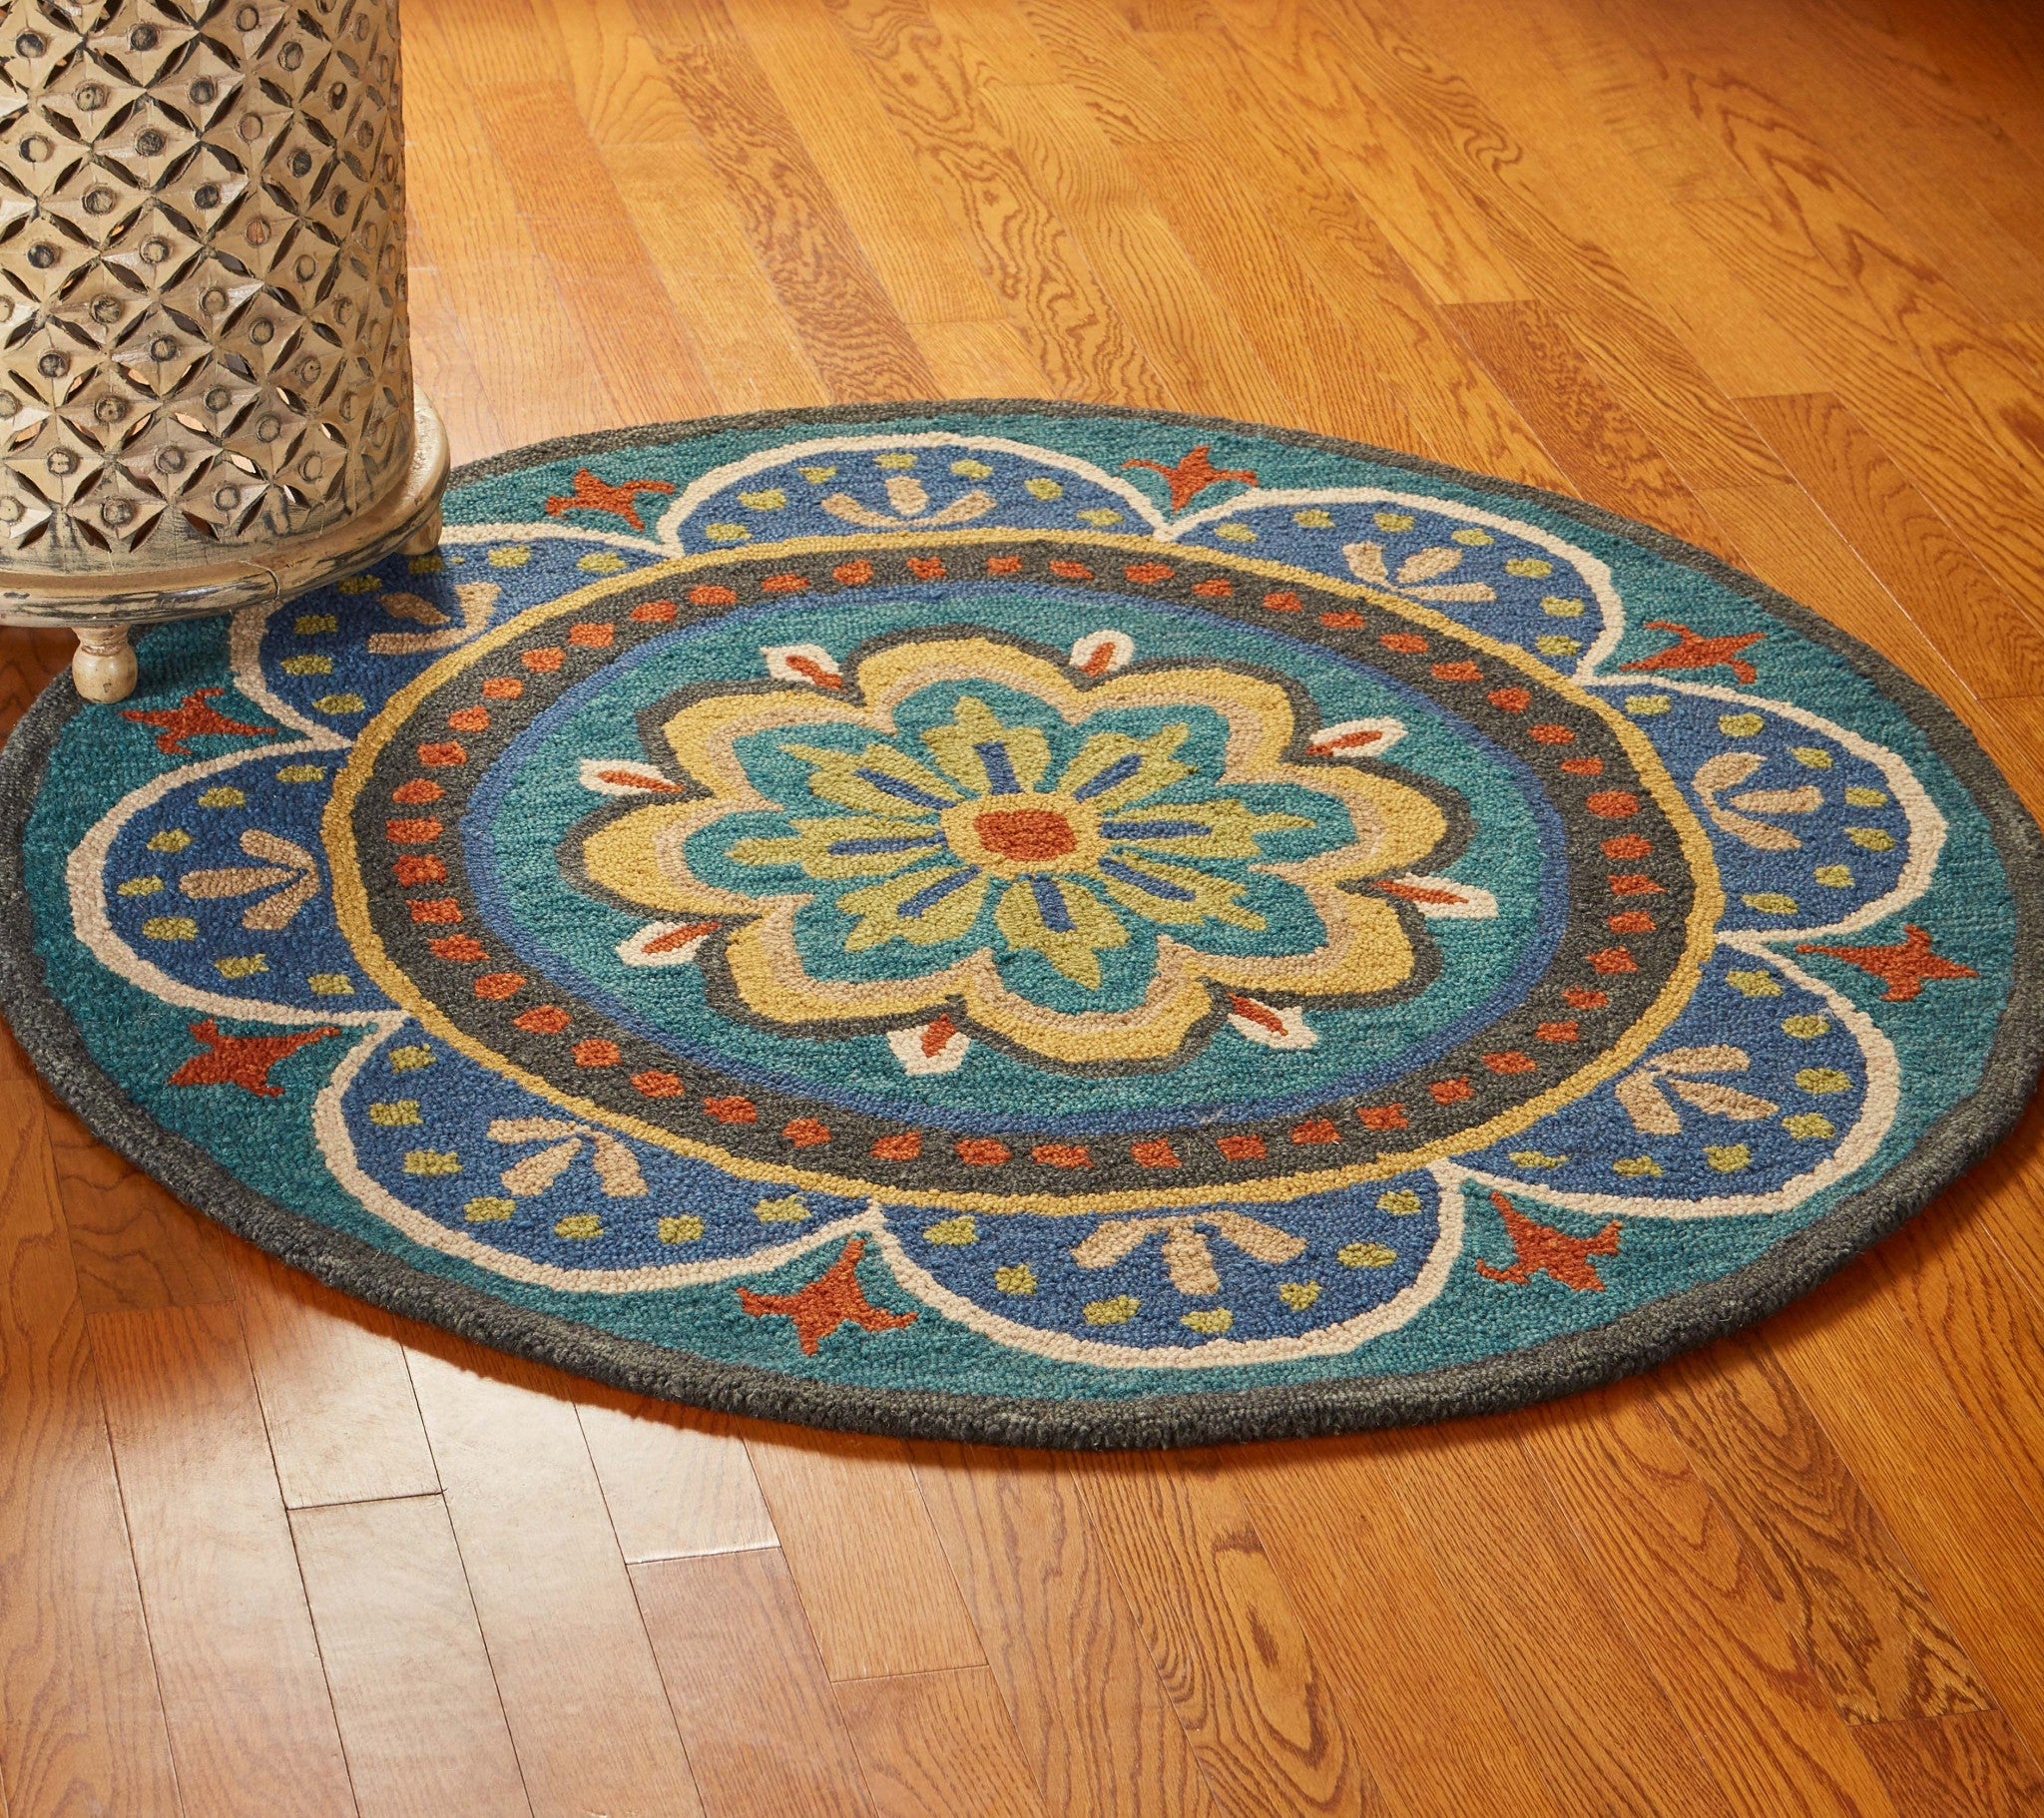 4' Blue and Orange Round Wool Floral Medallion Hand Tufted Area Rug